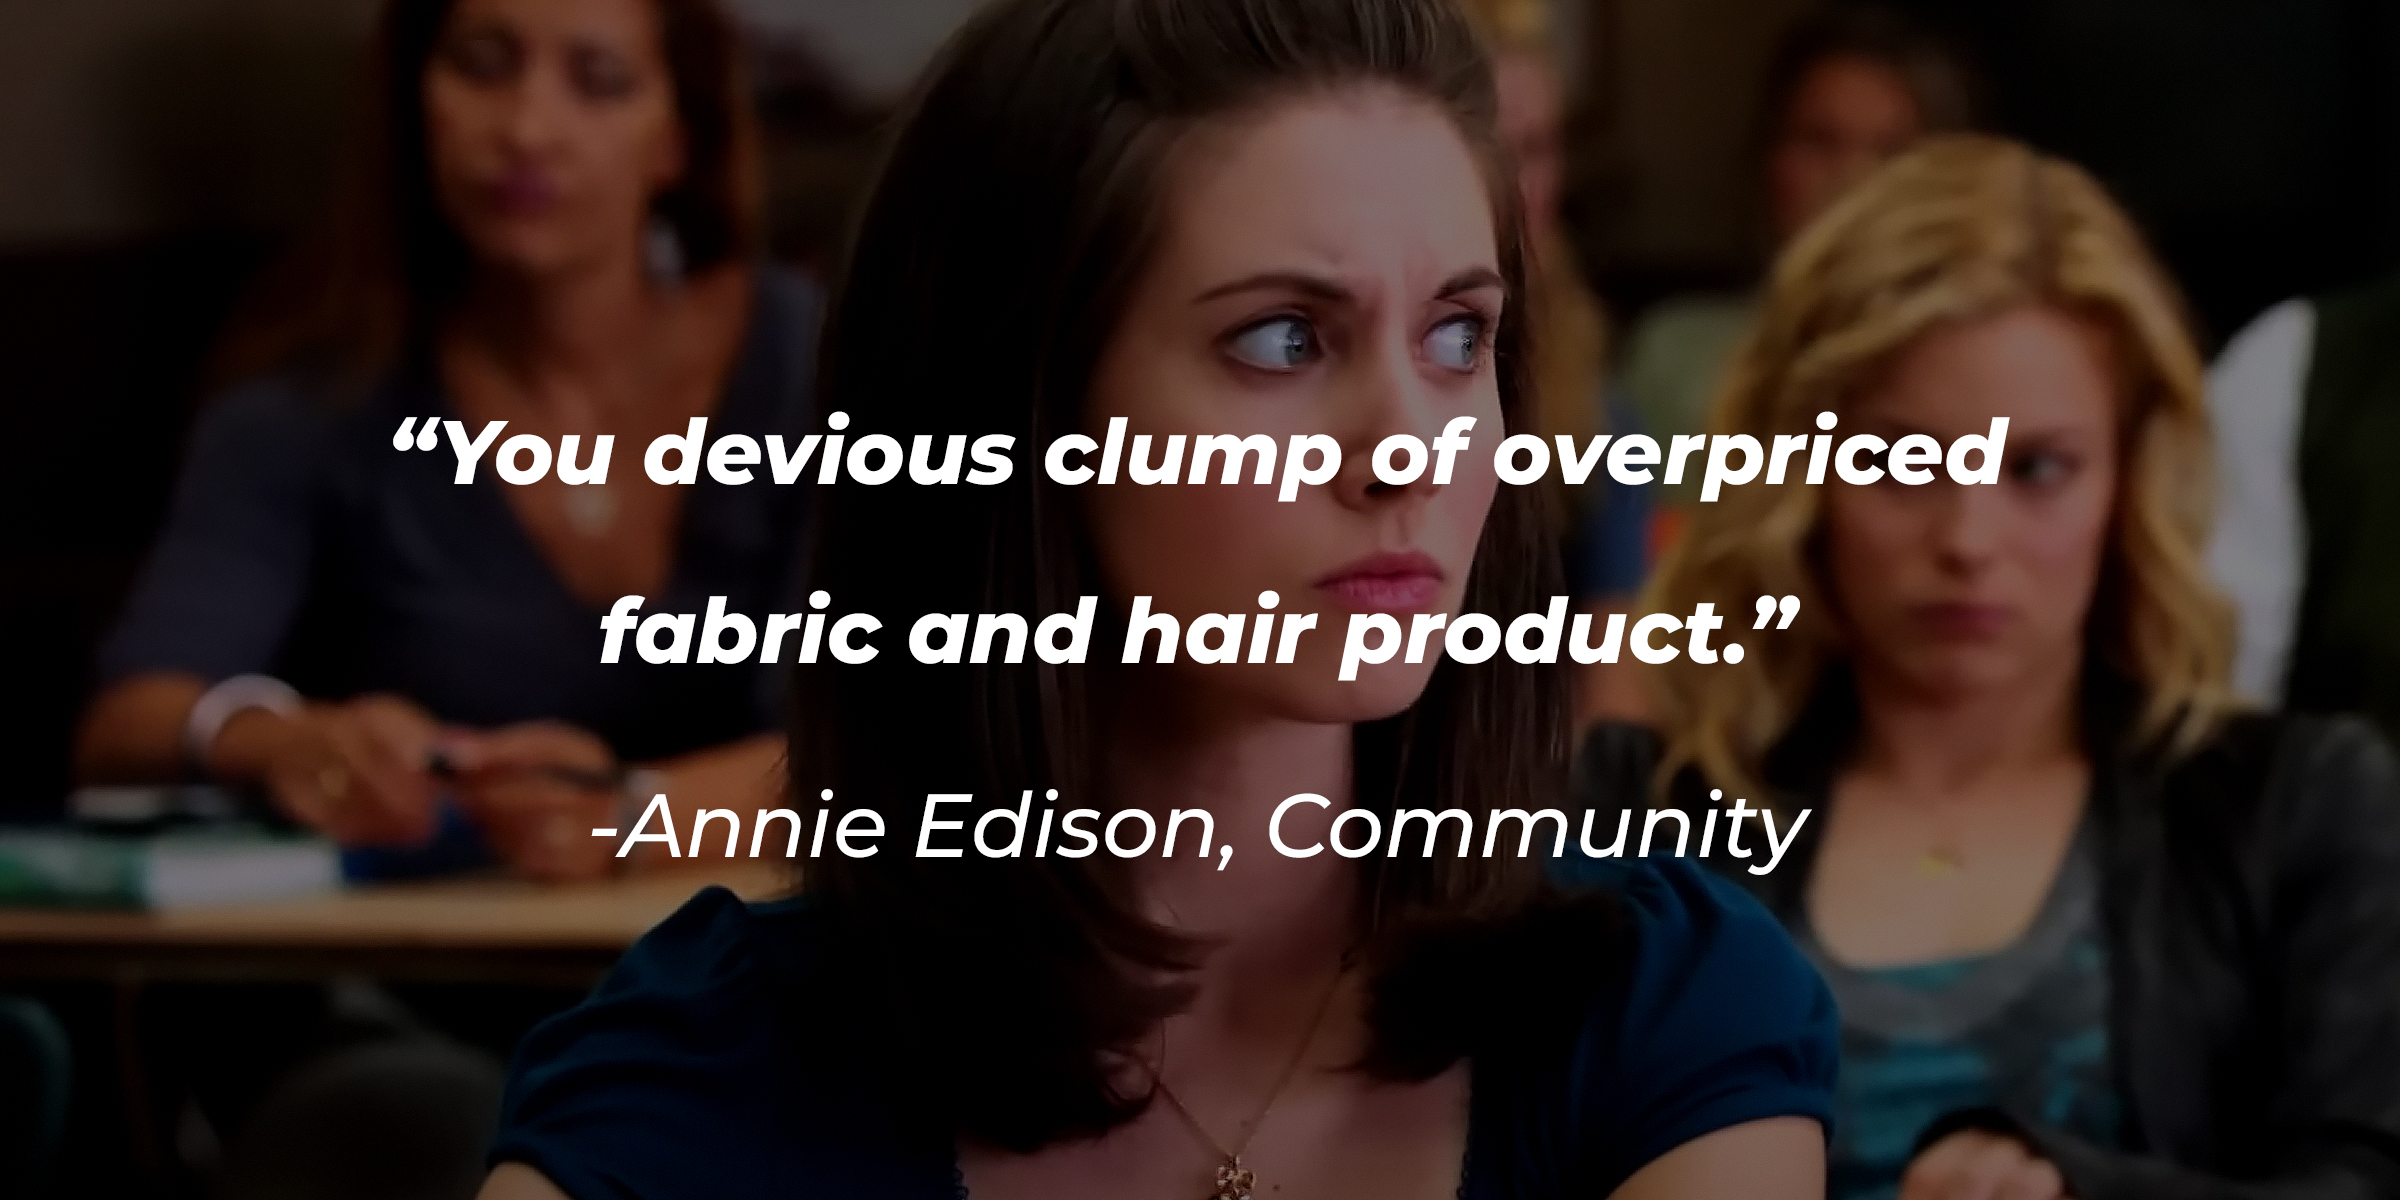 Annie Edison with her quote: "You devious clump of overpriced fabric and hair product" | Source: YouTube.com/CommunityOfficialChannel